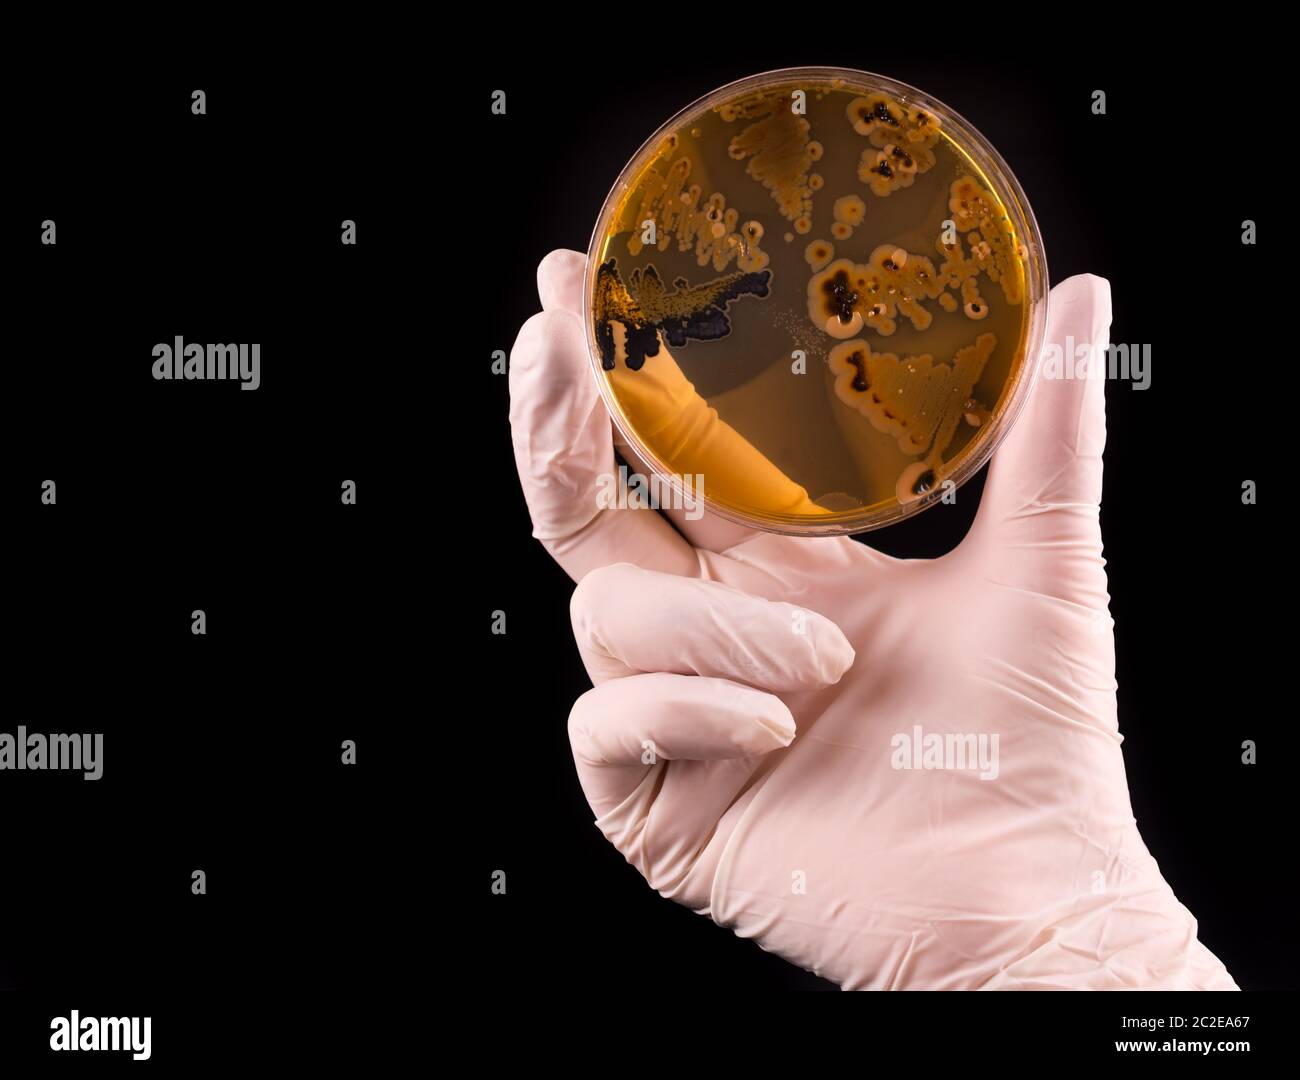 Scientist's hand holding petri dish infected with Salmonella bacteria on black background Stock Photo